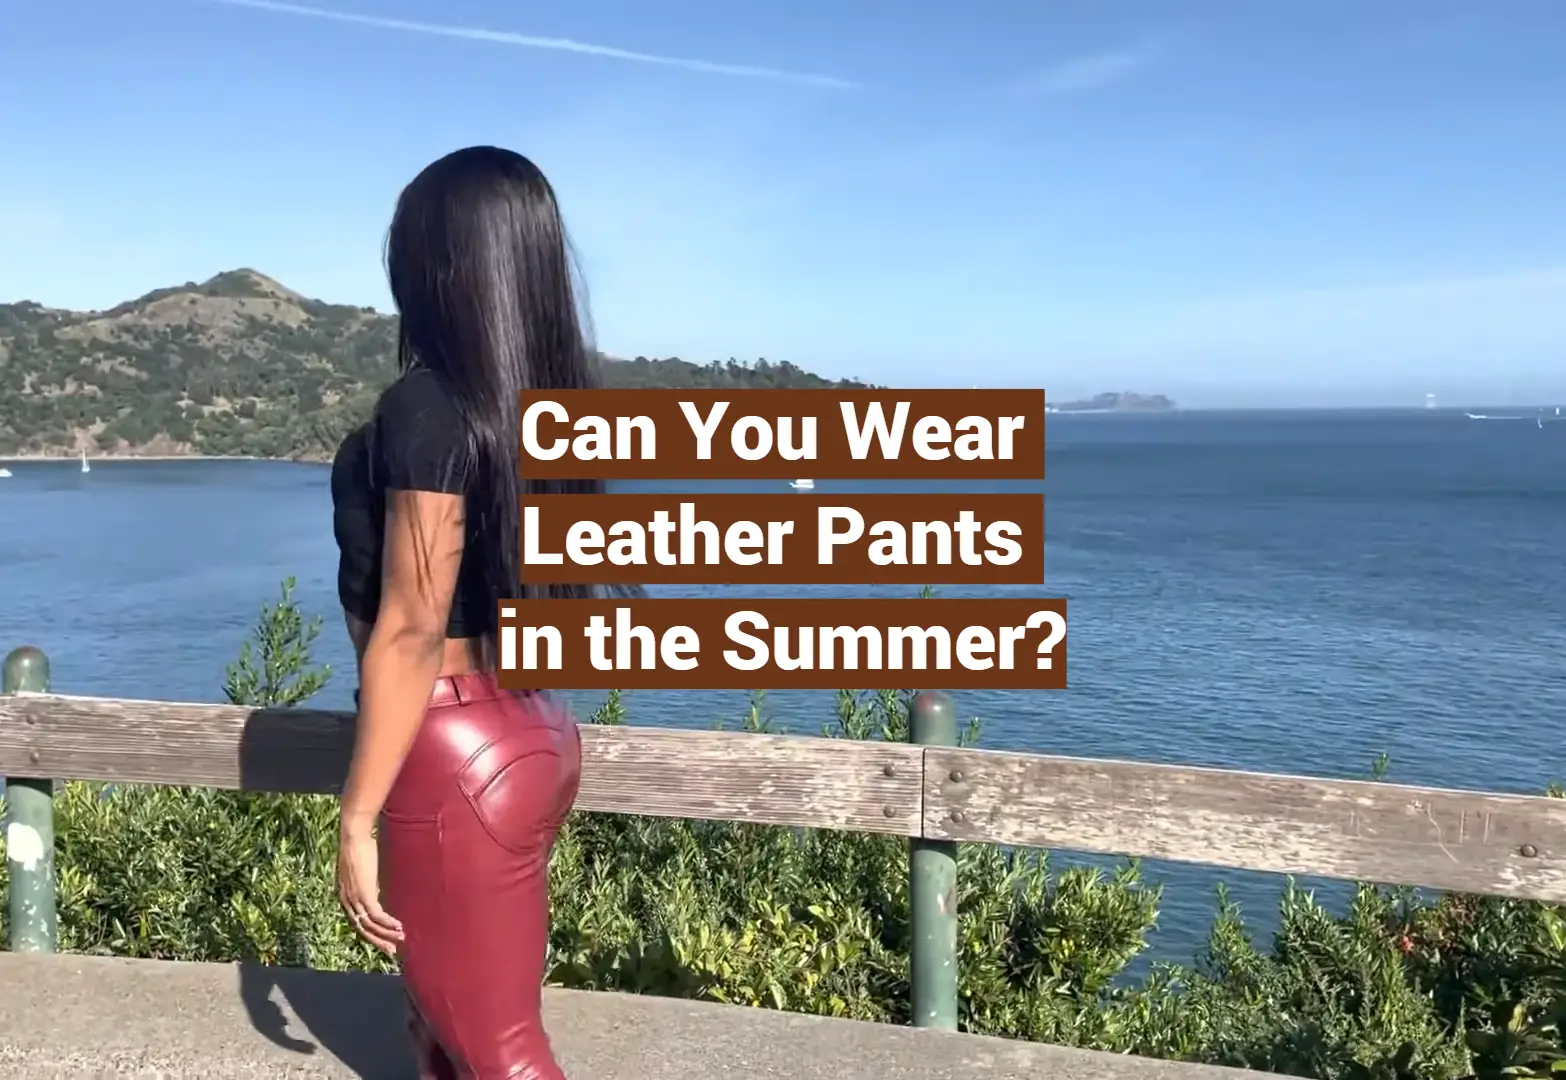 Can You Wear Leather Pants in the Summer?